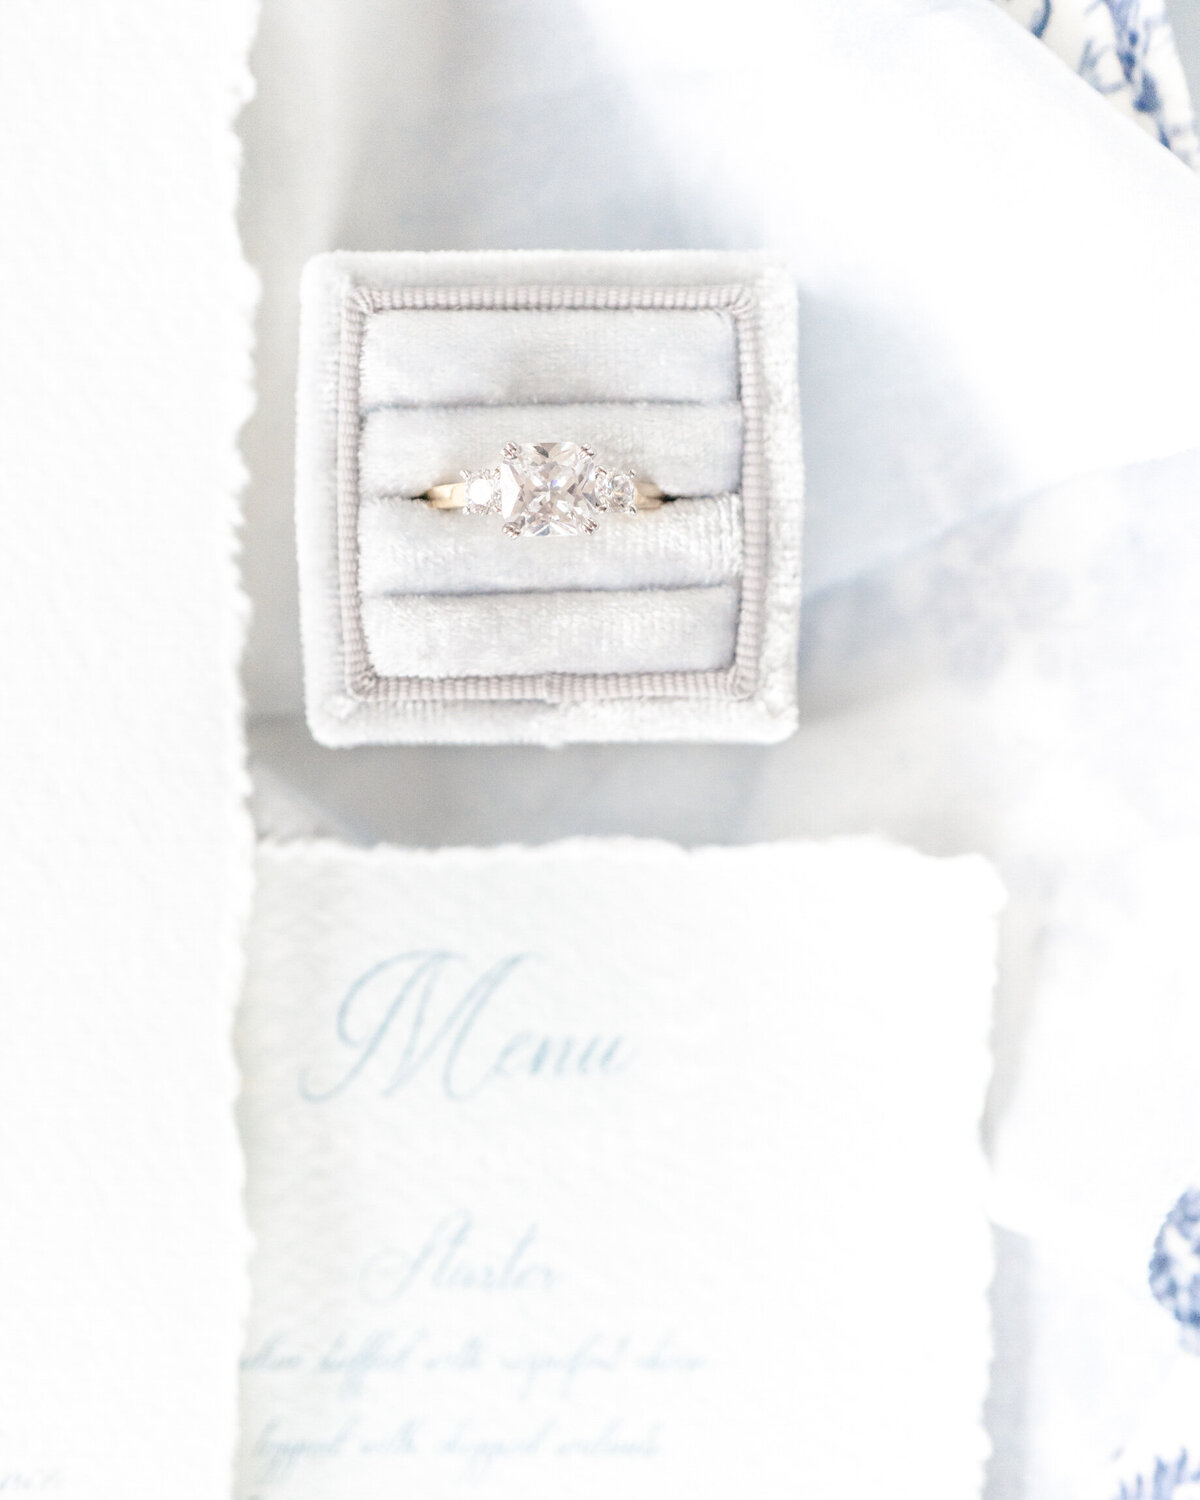 09-French-Chateau-de-Courtomer-Flatlay-Wedding-Stationery-Blue-Silver-White-Victoria-Amrose-Photography (5)